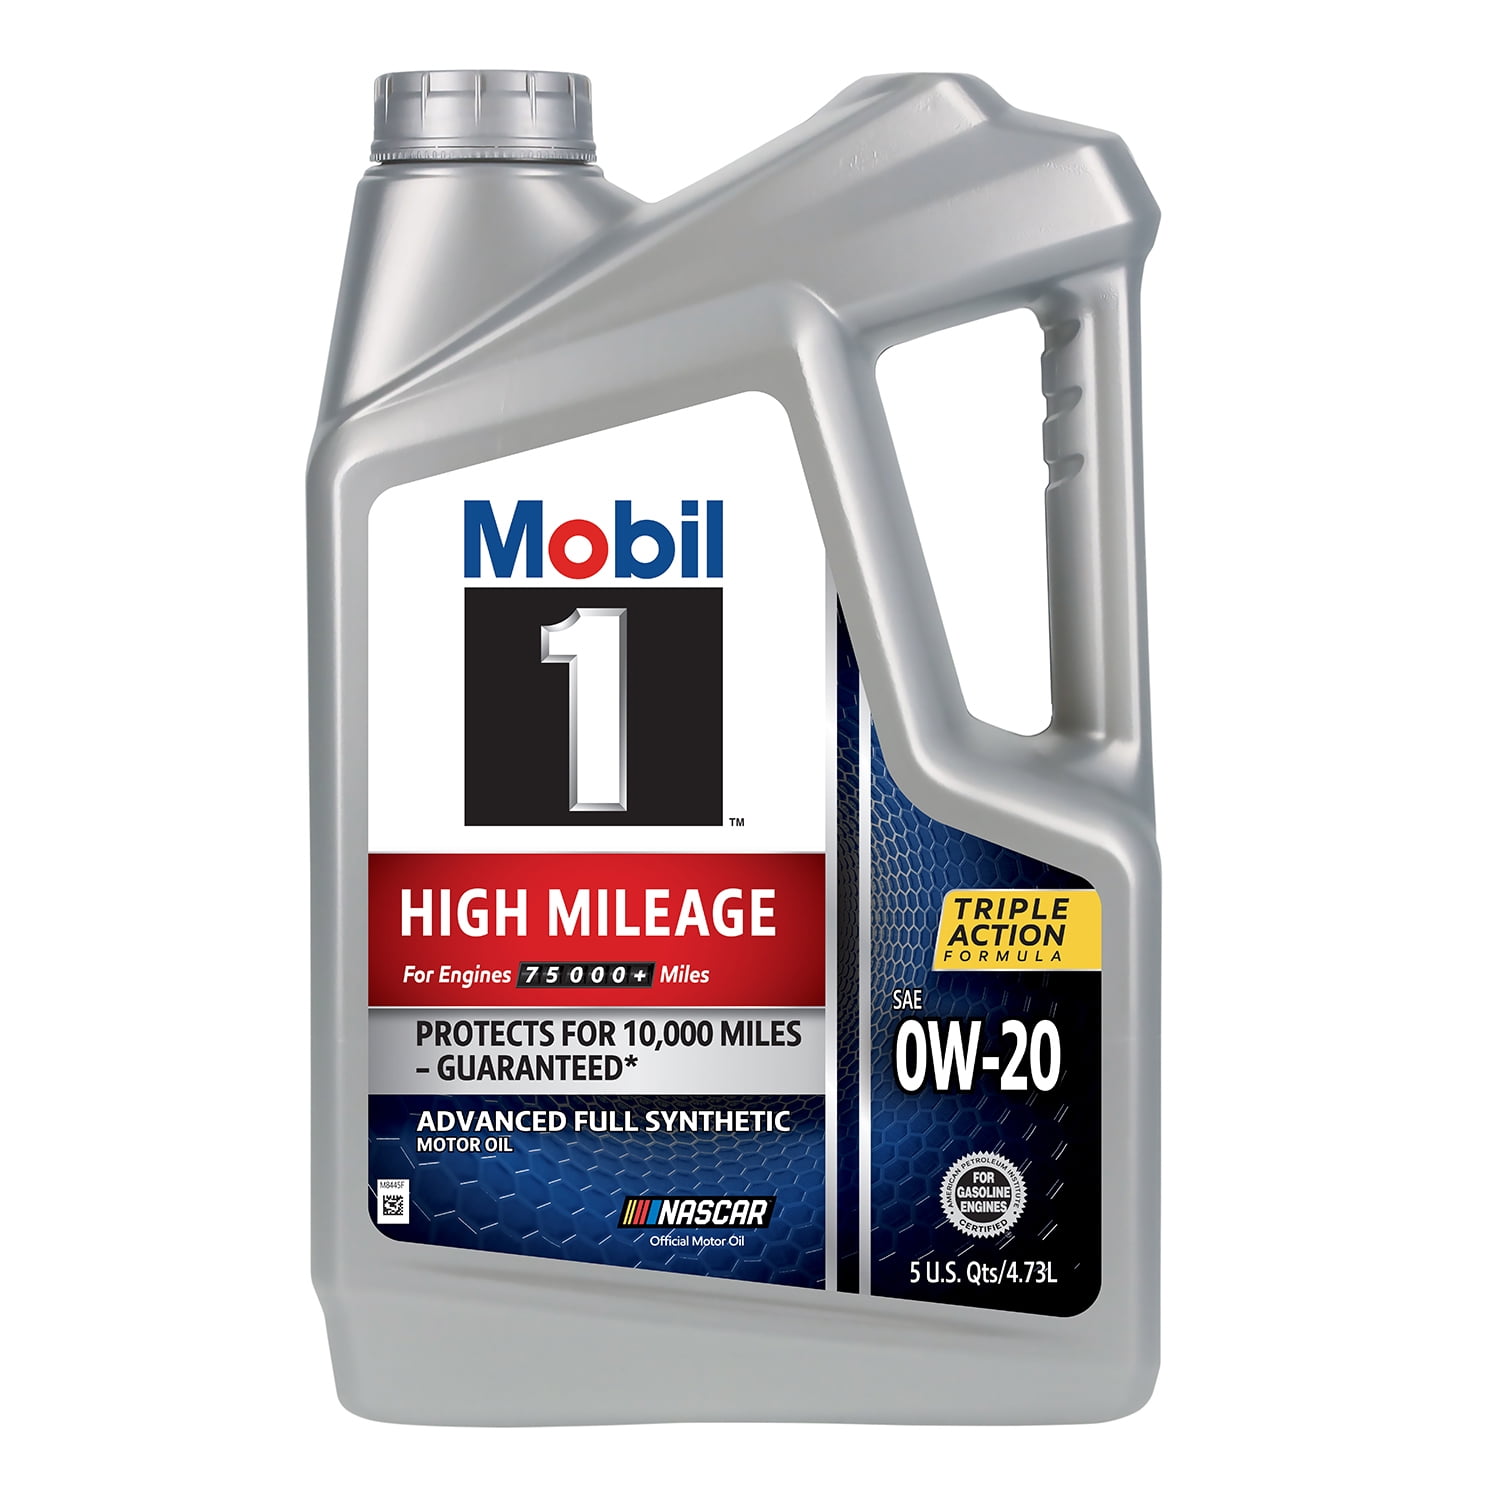 Mobil 1 High Mileage Full Synthetic Motor Oil 0W-20, 5 qt (3 Pack) - 2